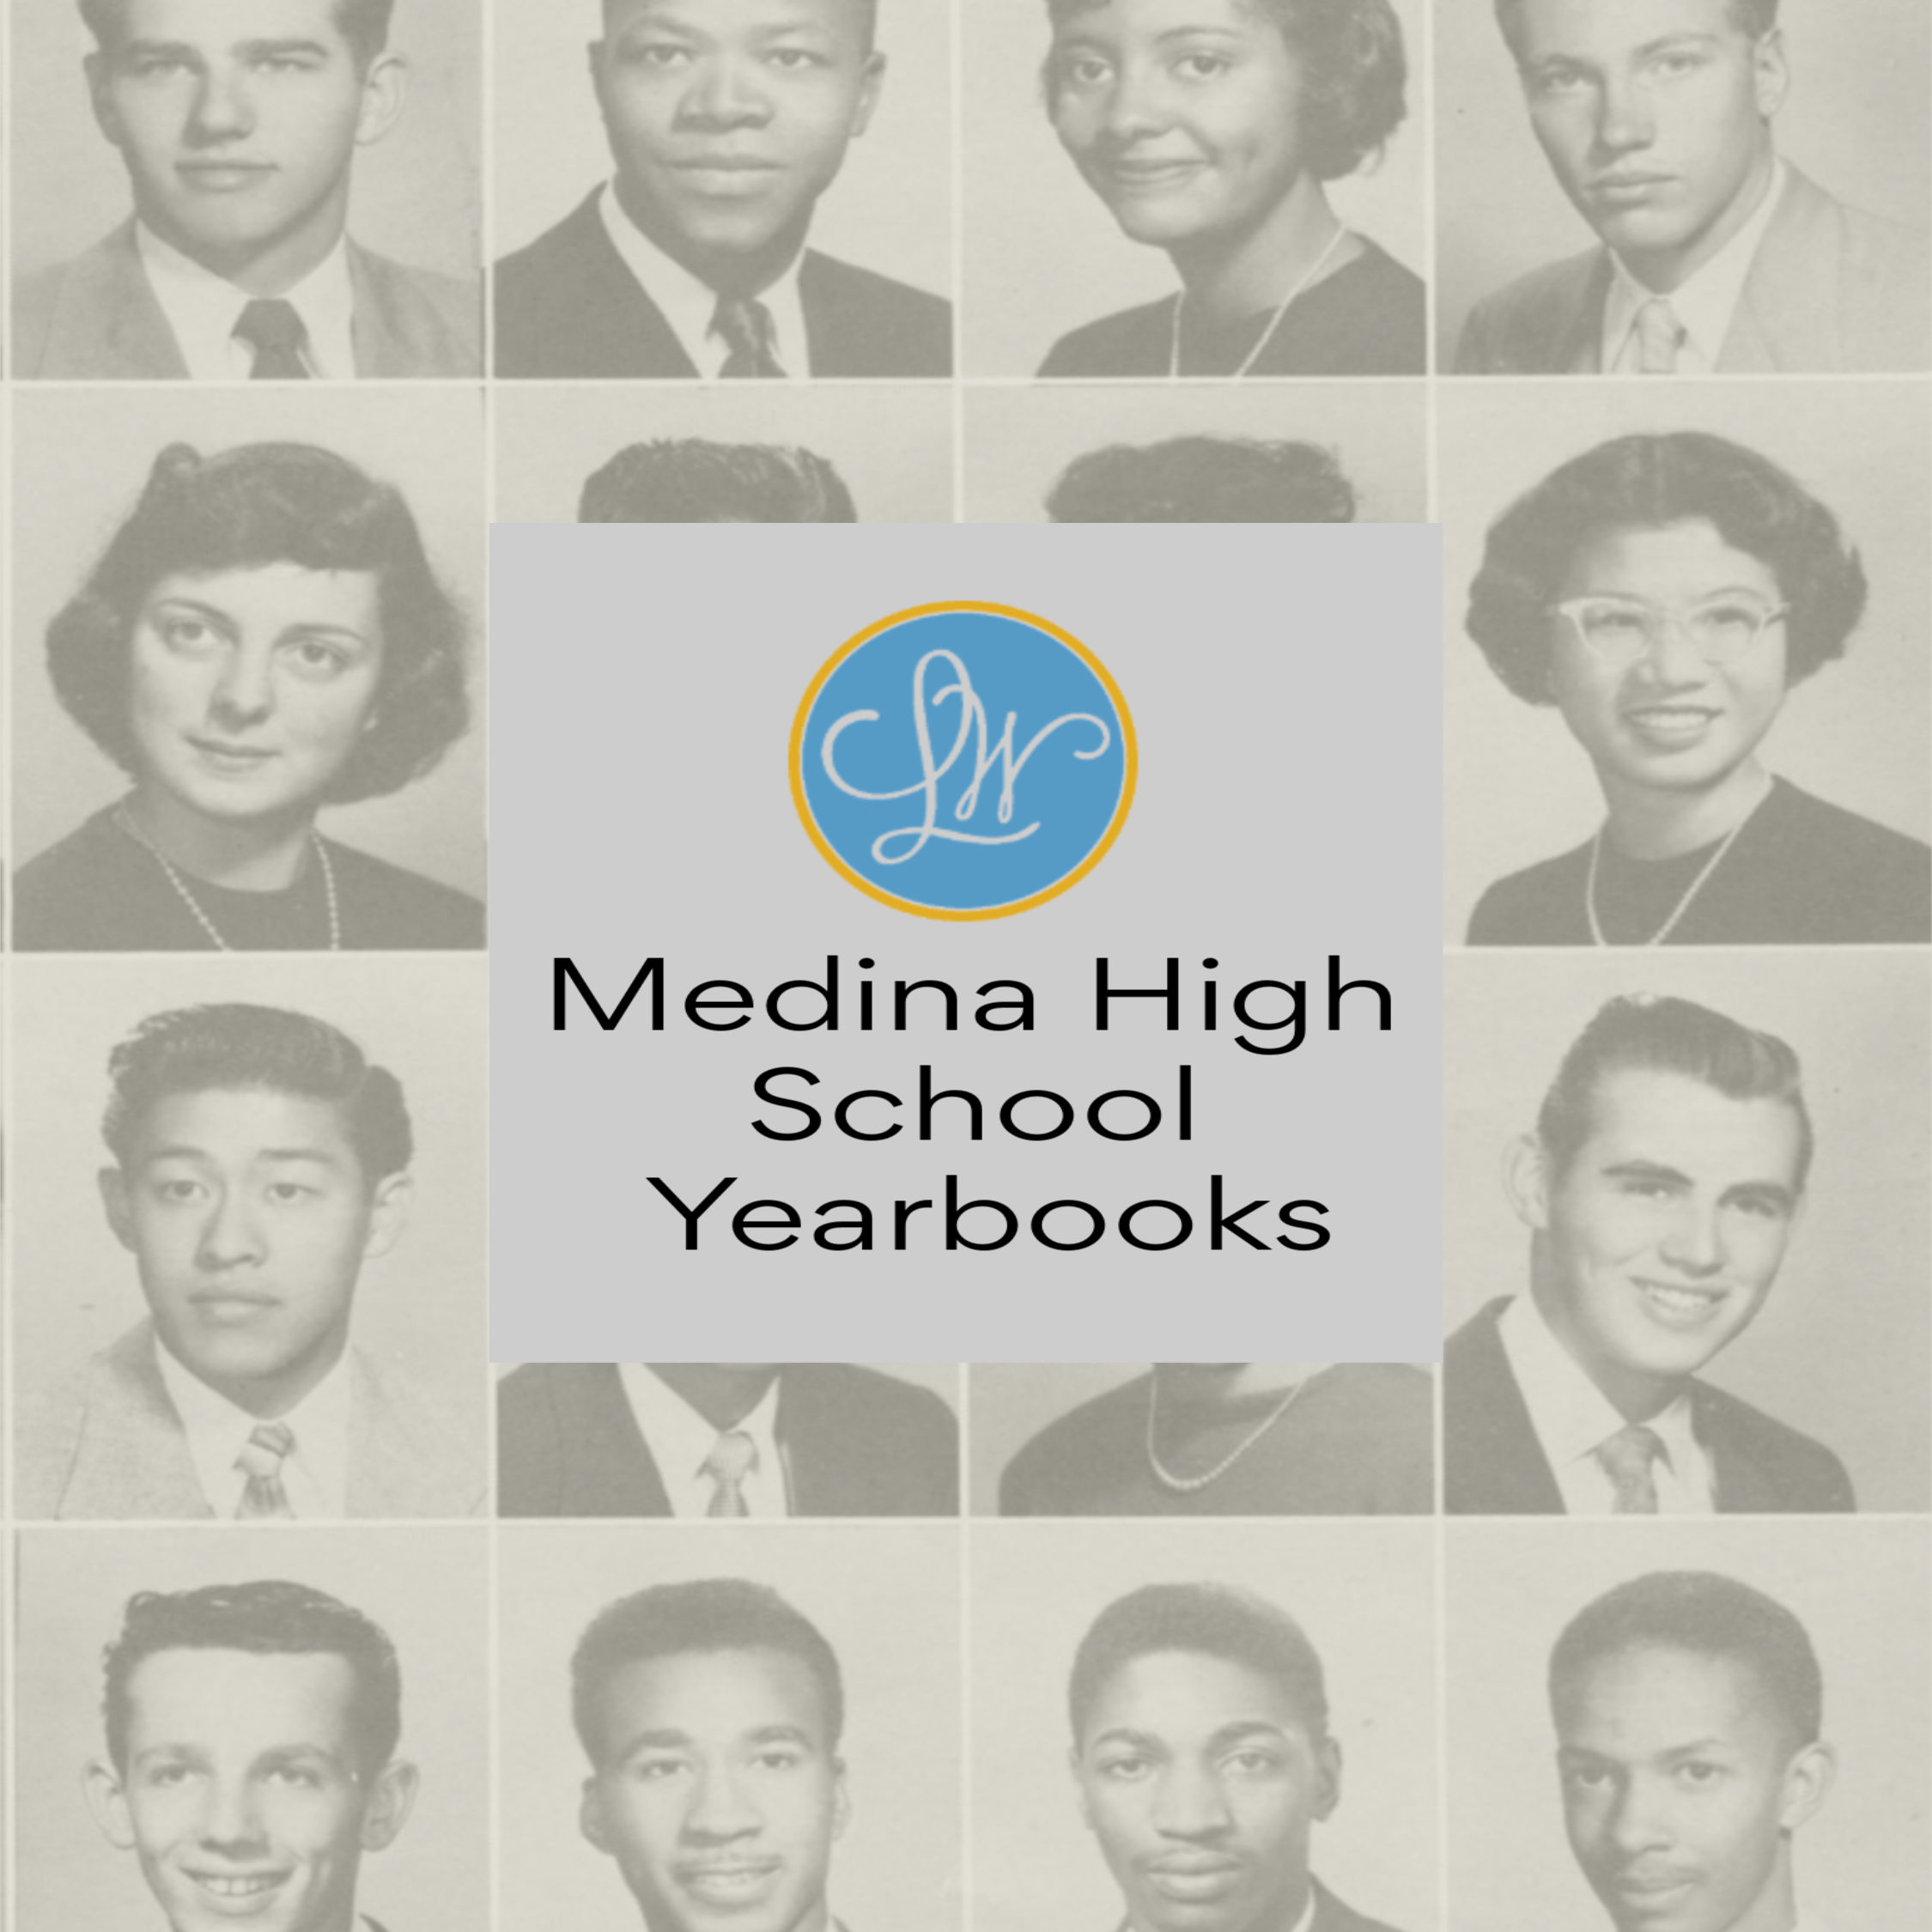 View past yearbooks from Medina High School